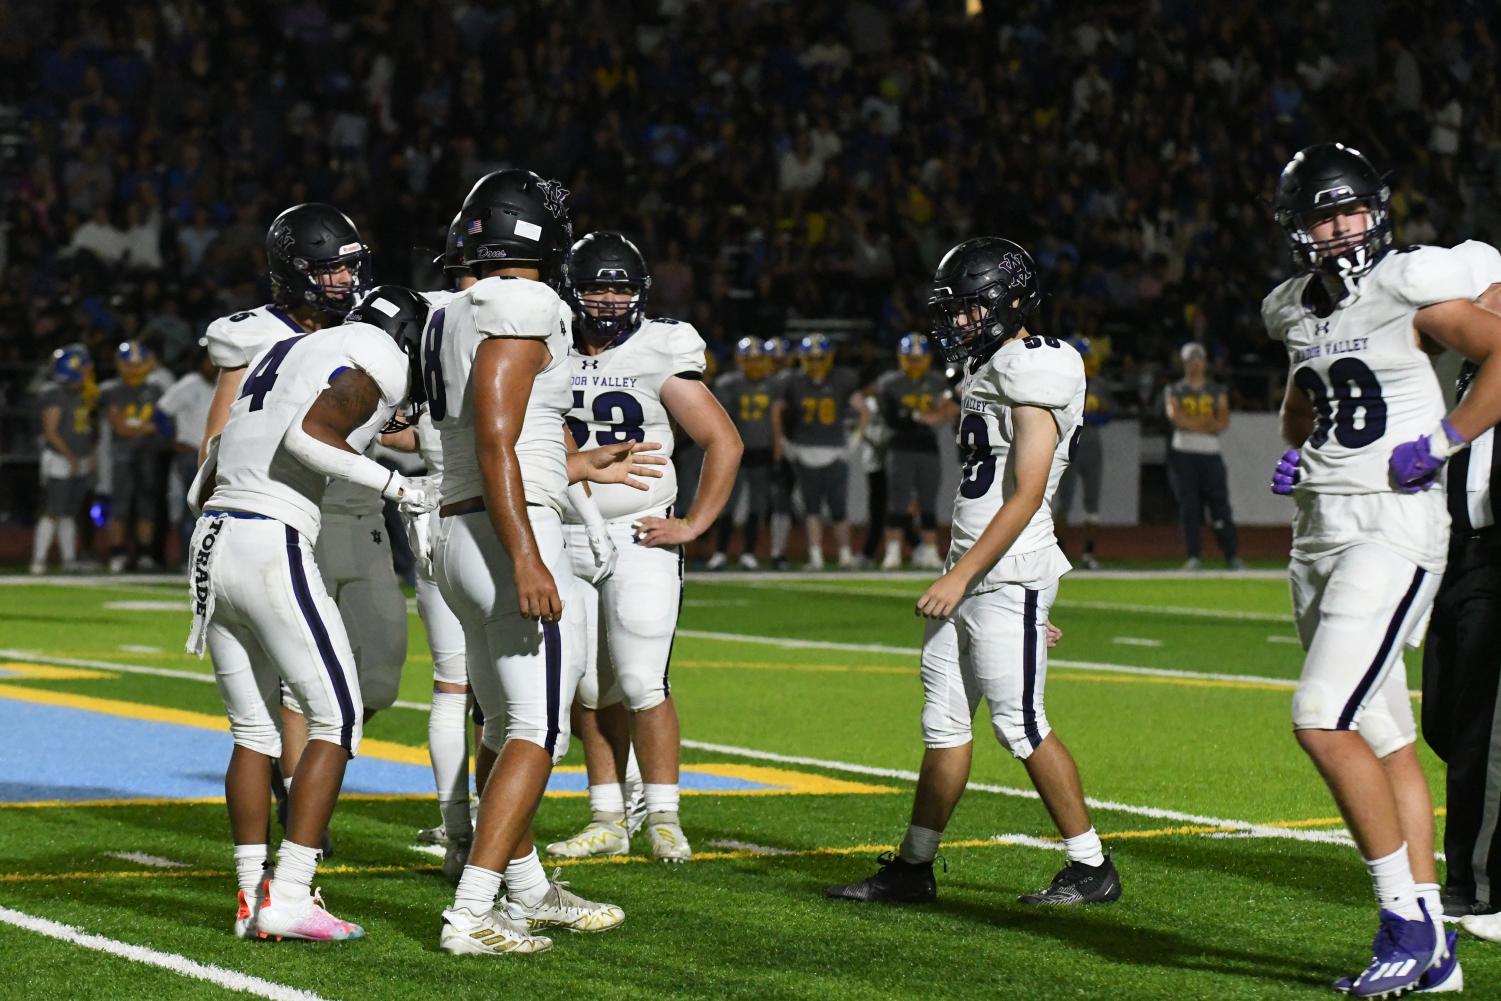 Amador+Valley+Football+defeats+Foothill+with+an+overtime+touchdown